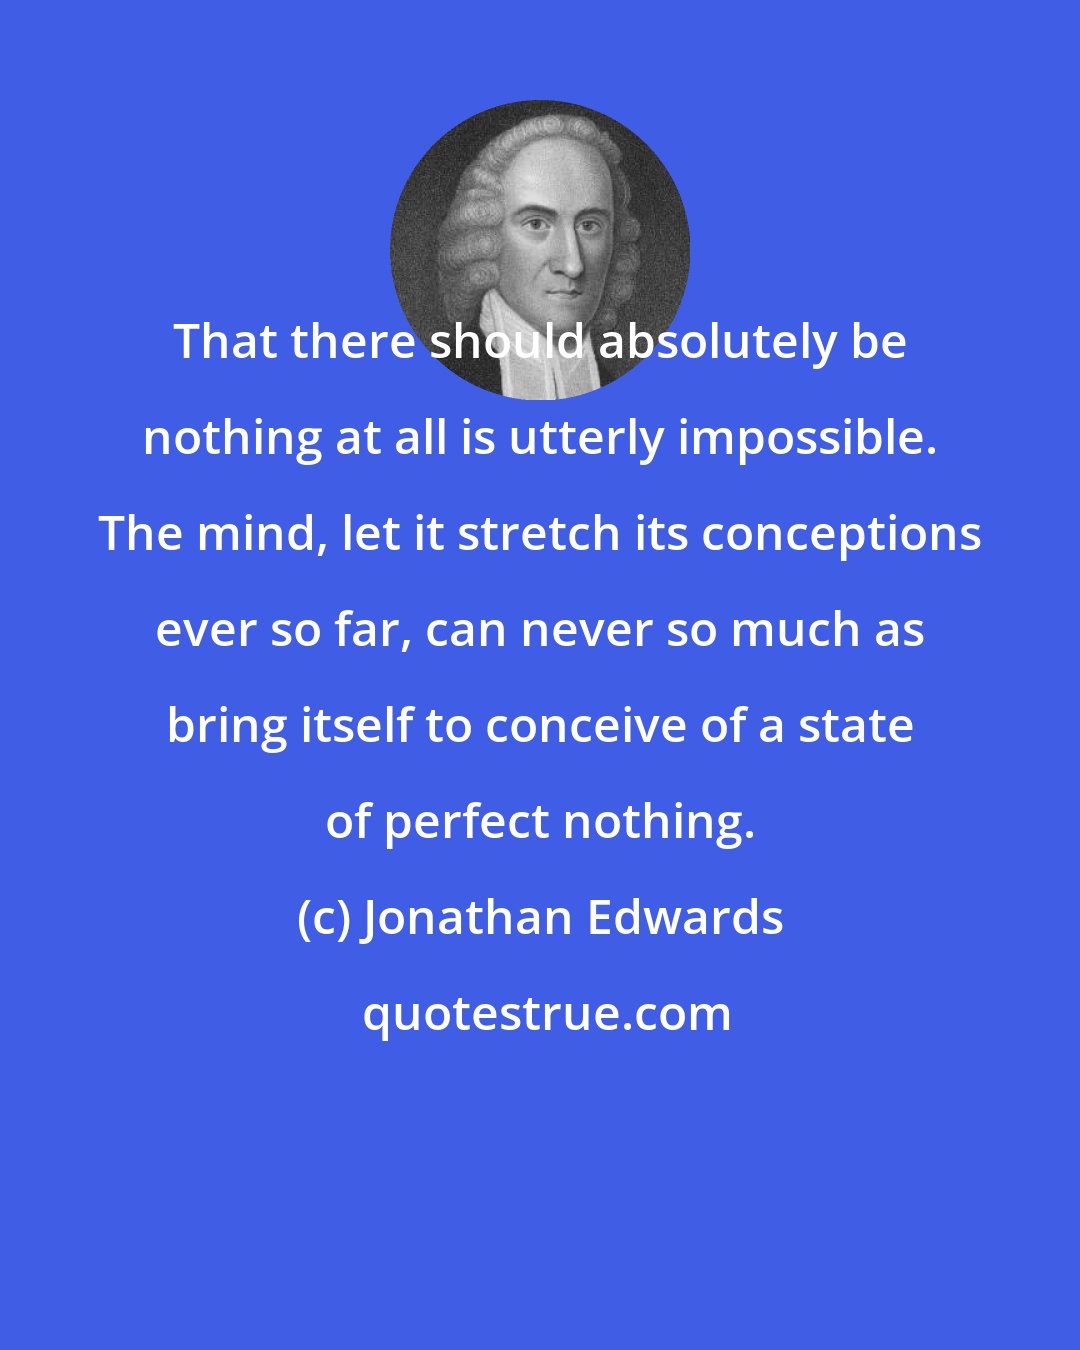 Jonathan Edwards: That there should absolutely be nothing at all is utterly impossible. The mind, let it stretch its conceptions ever so far, can never so much as bring itself to conceive of a state of perfect nothing.